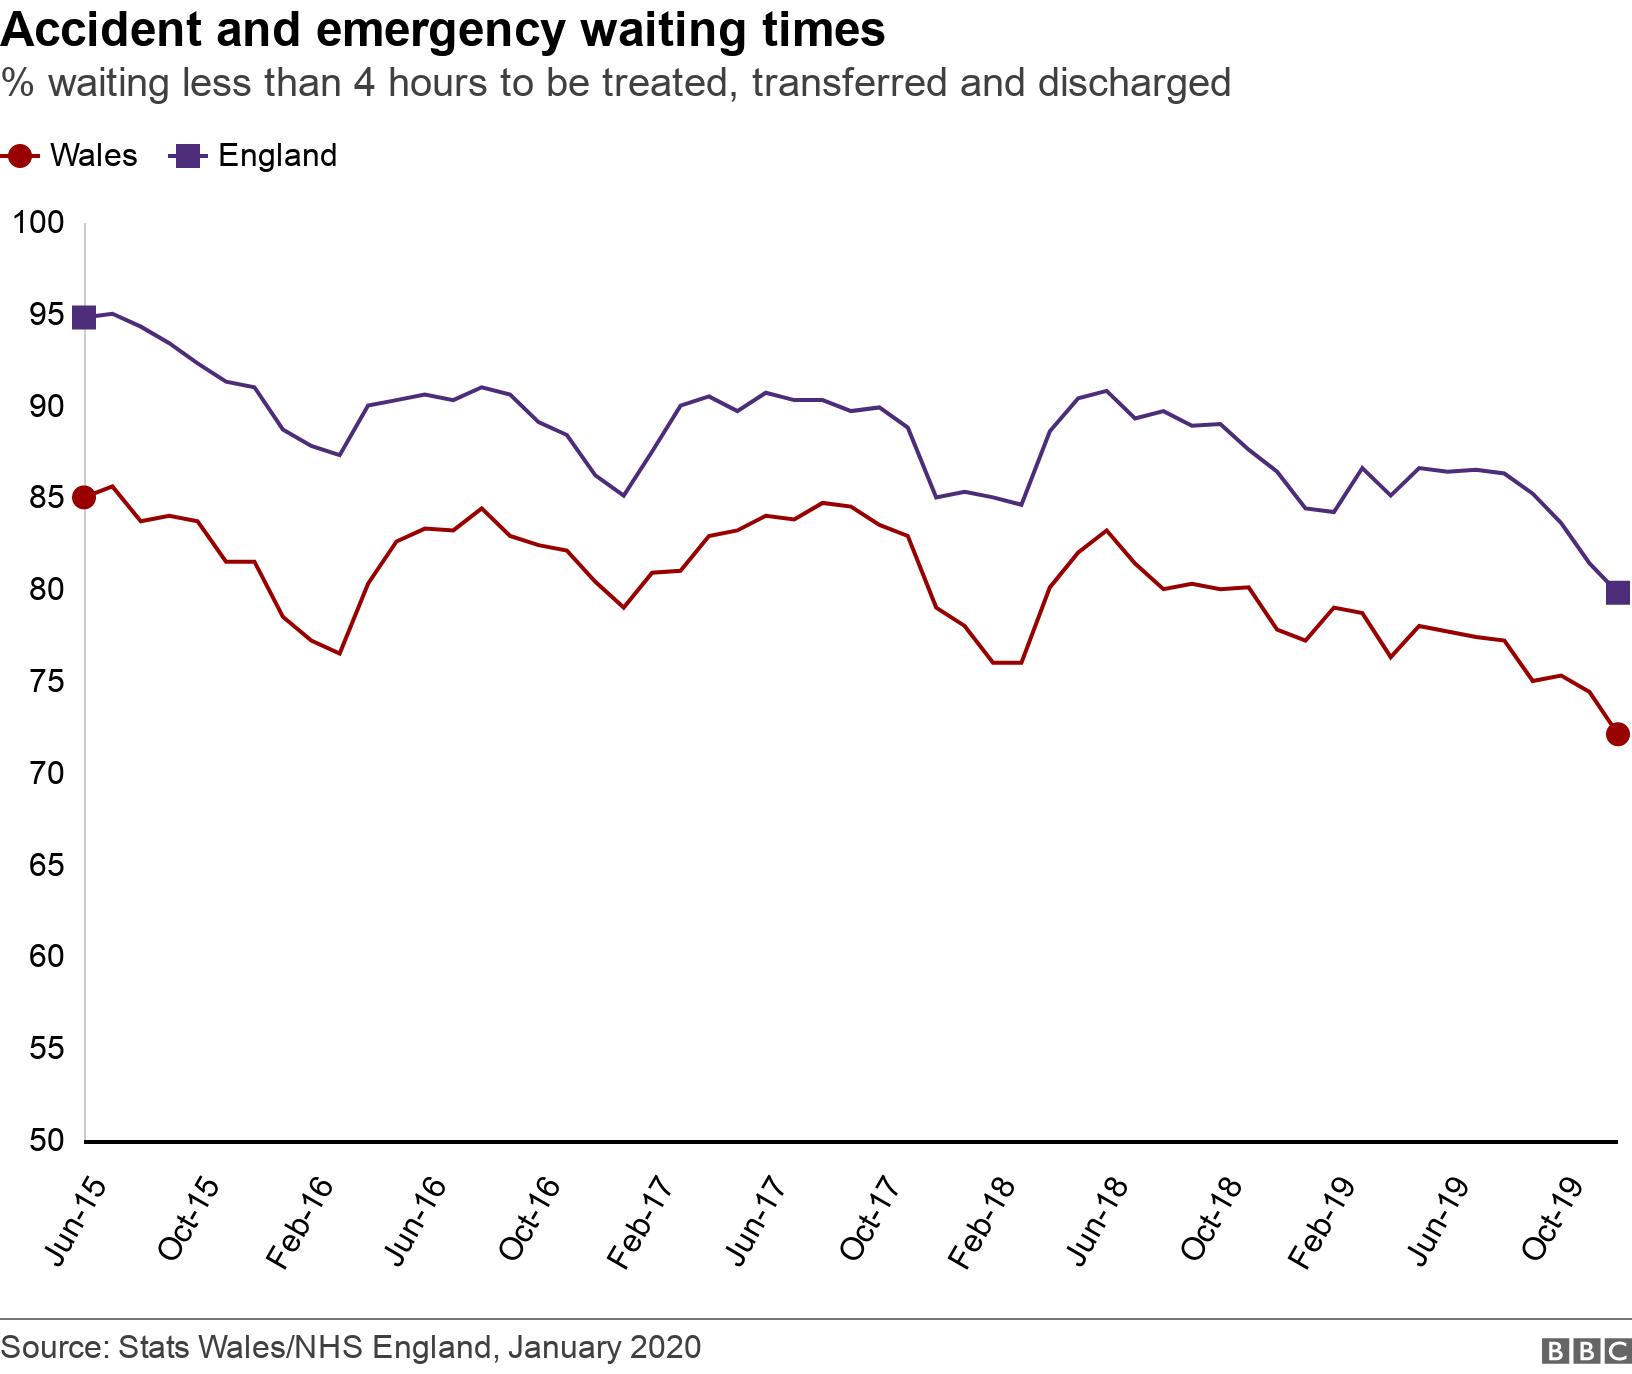 Accident and emergency waiting times. % waiting less than 4 hours to be treated, transferred and discharged. .